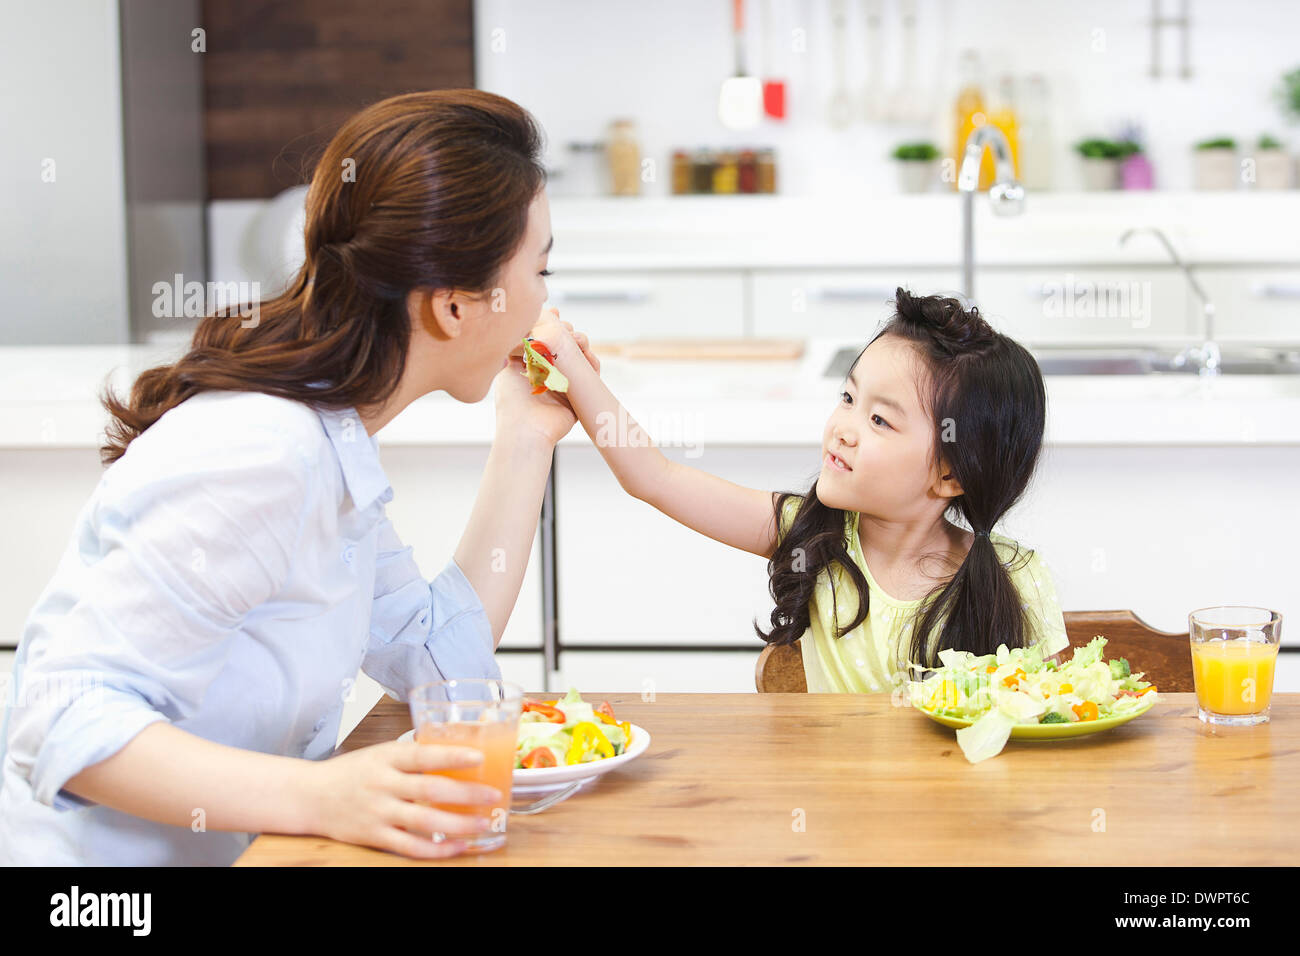 a kid giving a bite of sandwich to a woman Stock Photo